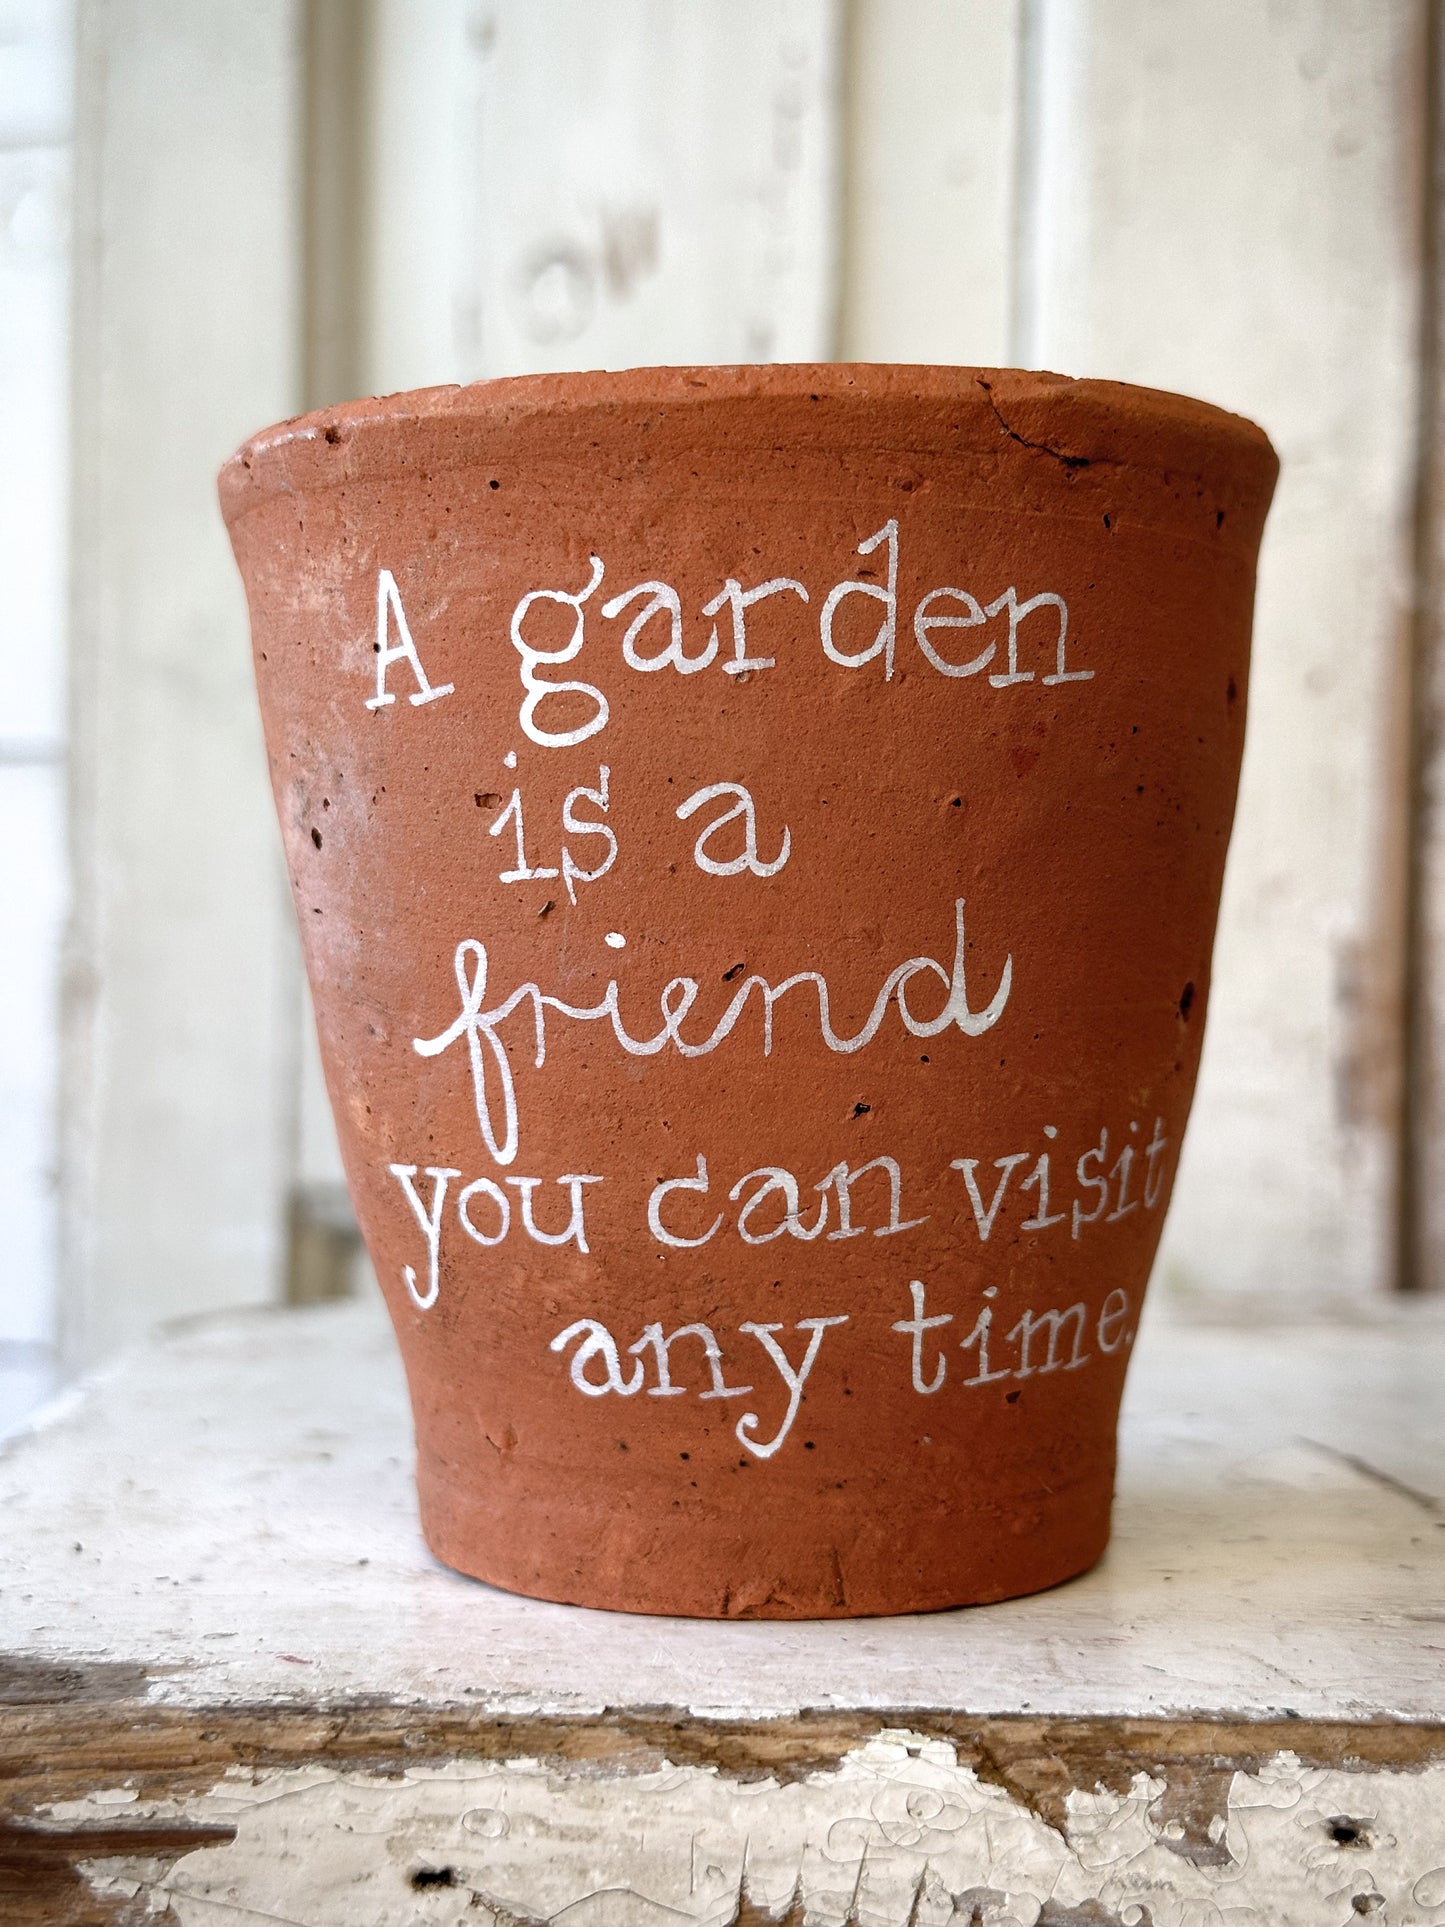 A Victorian terracotta pot with a quote